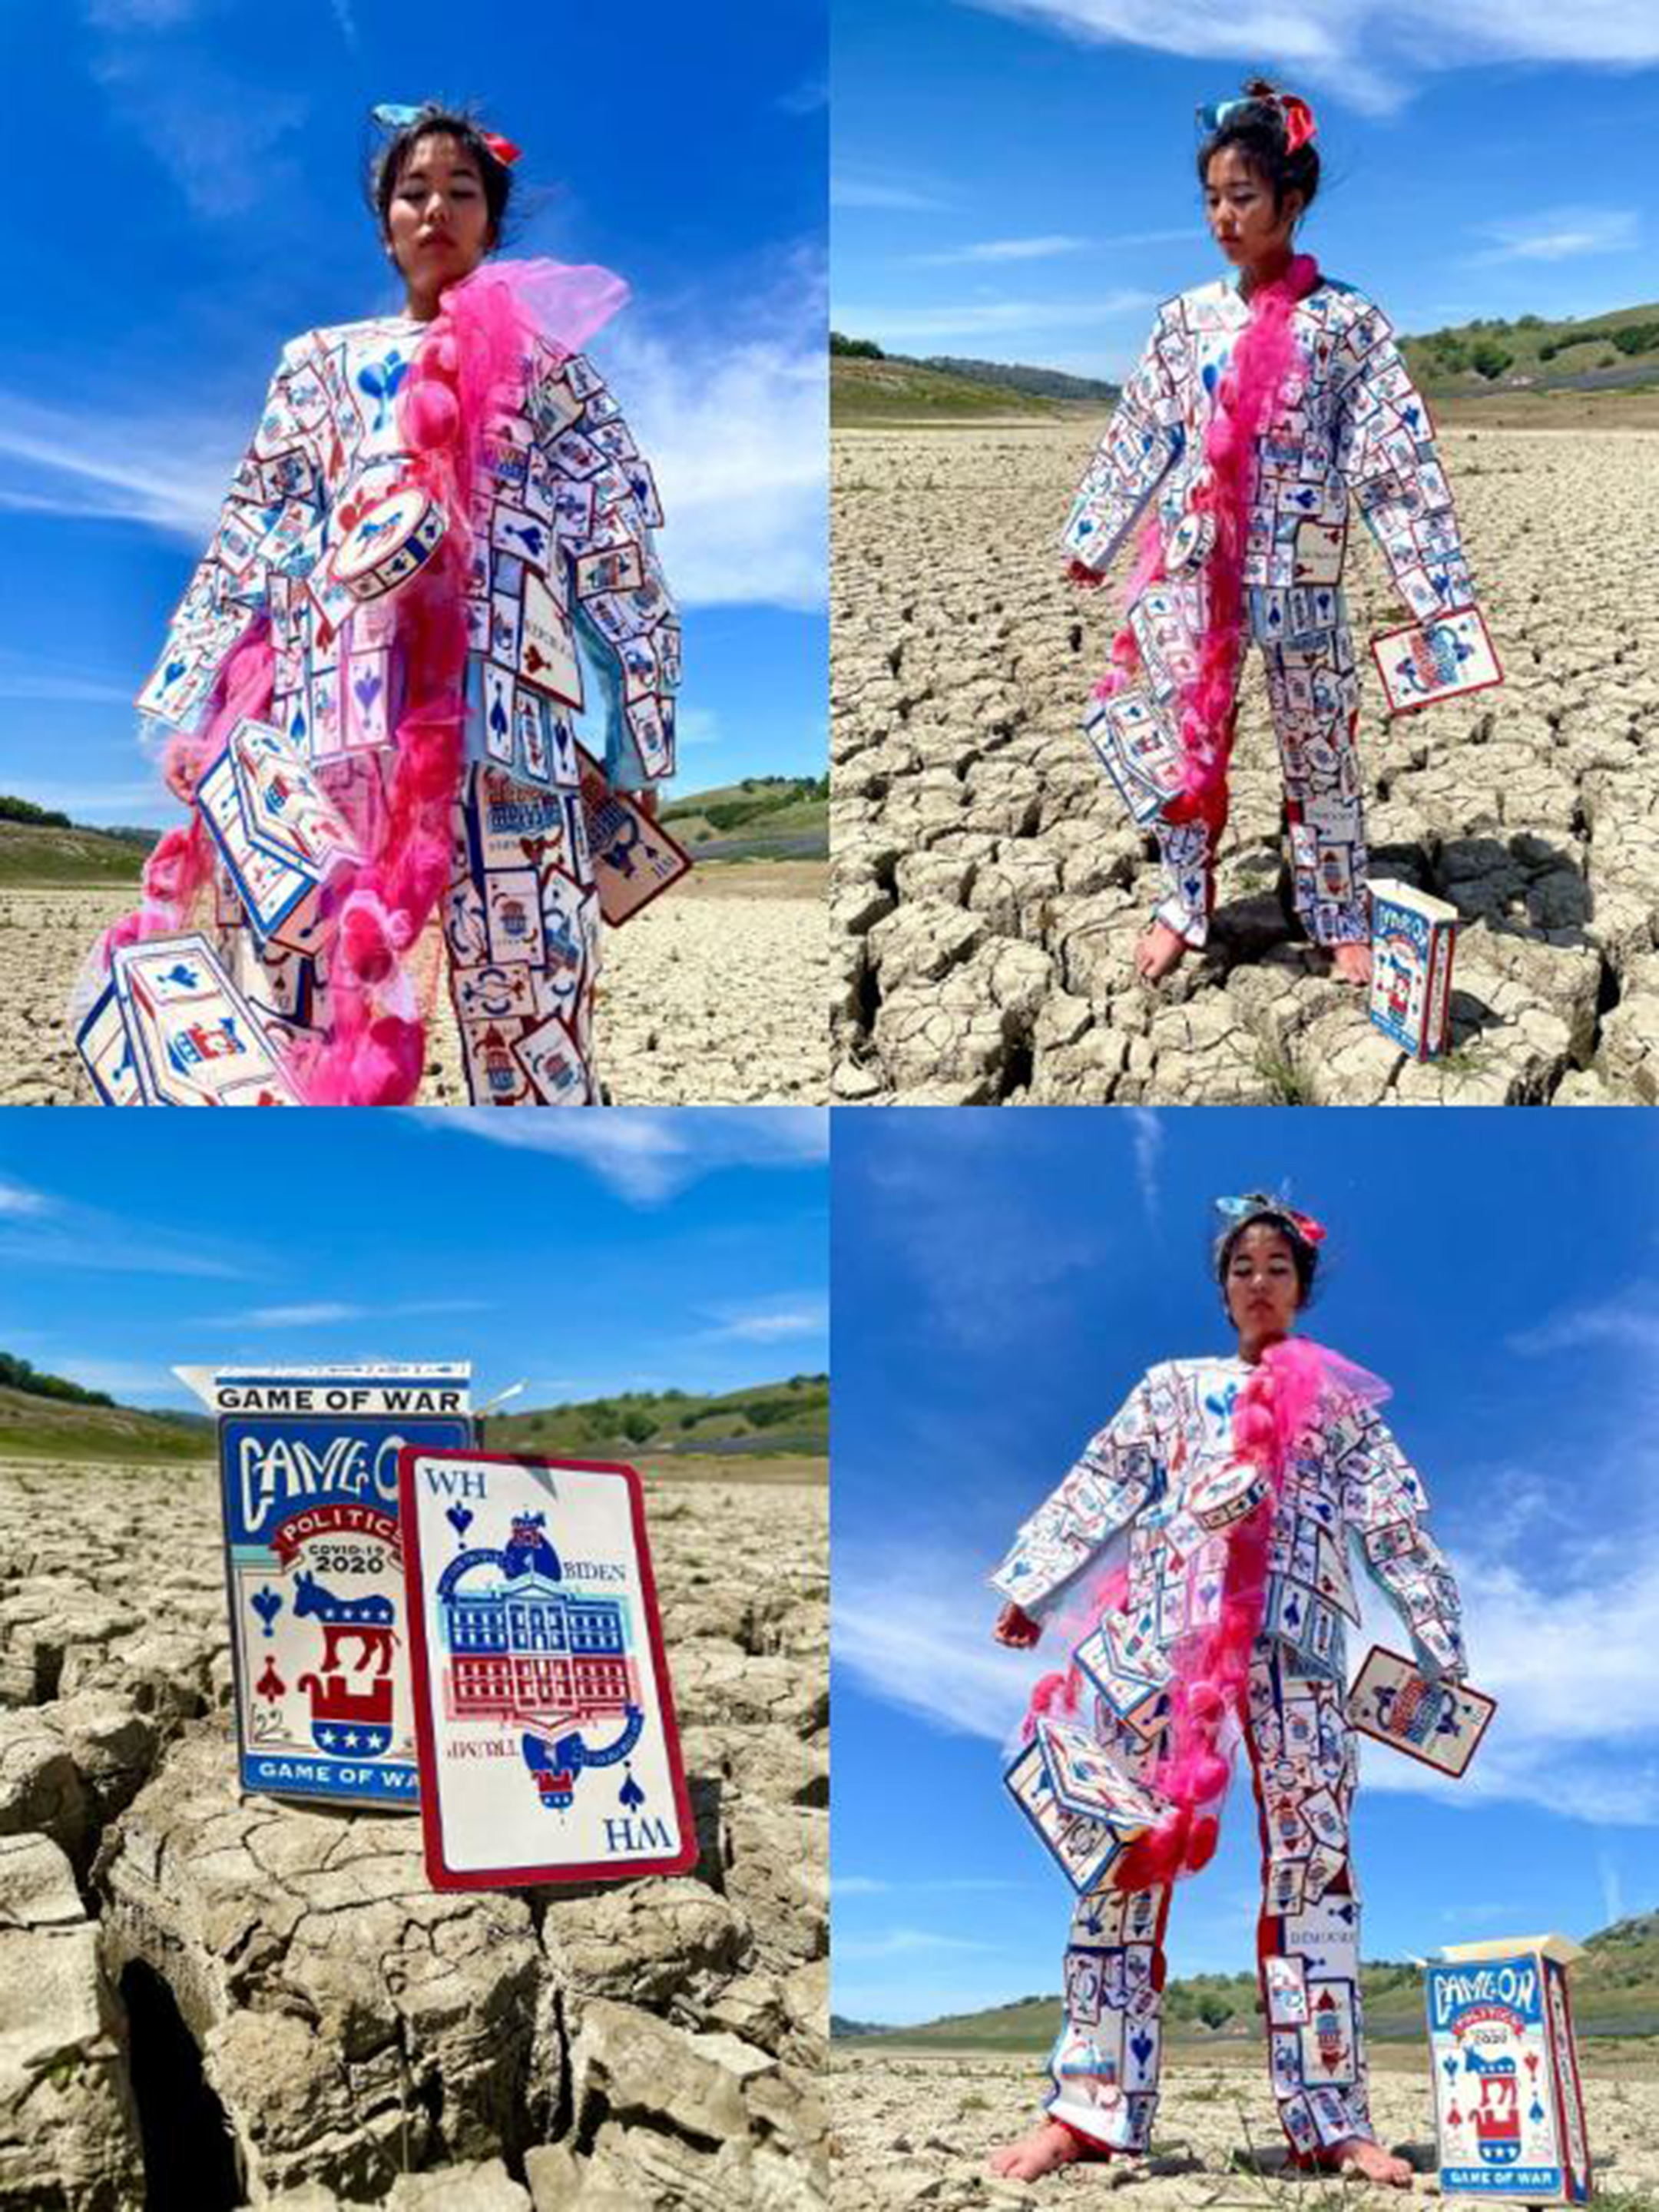 Grid of four images showing a woman in a costume made of political playing cards